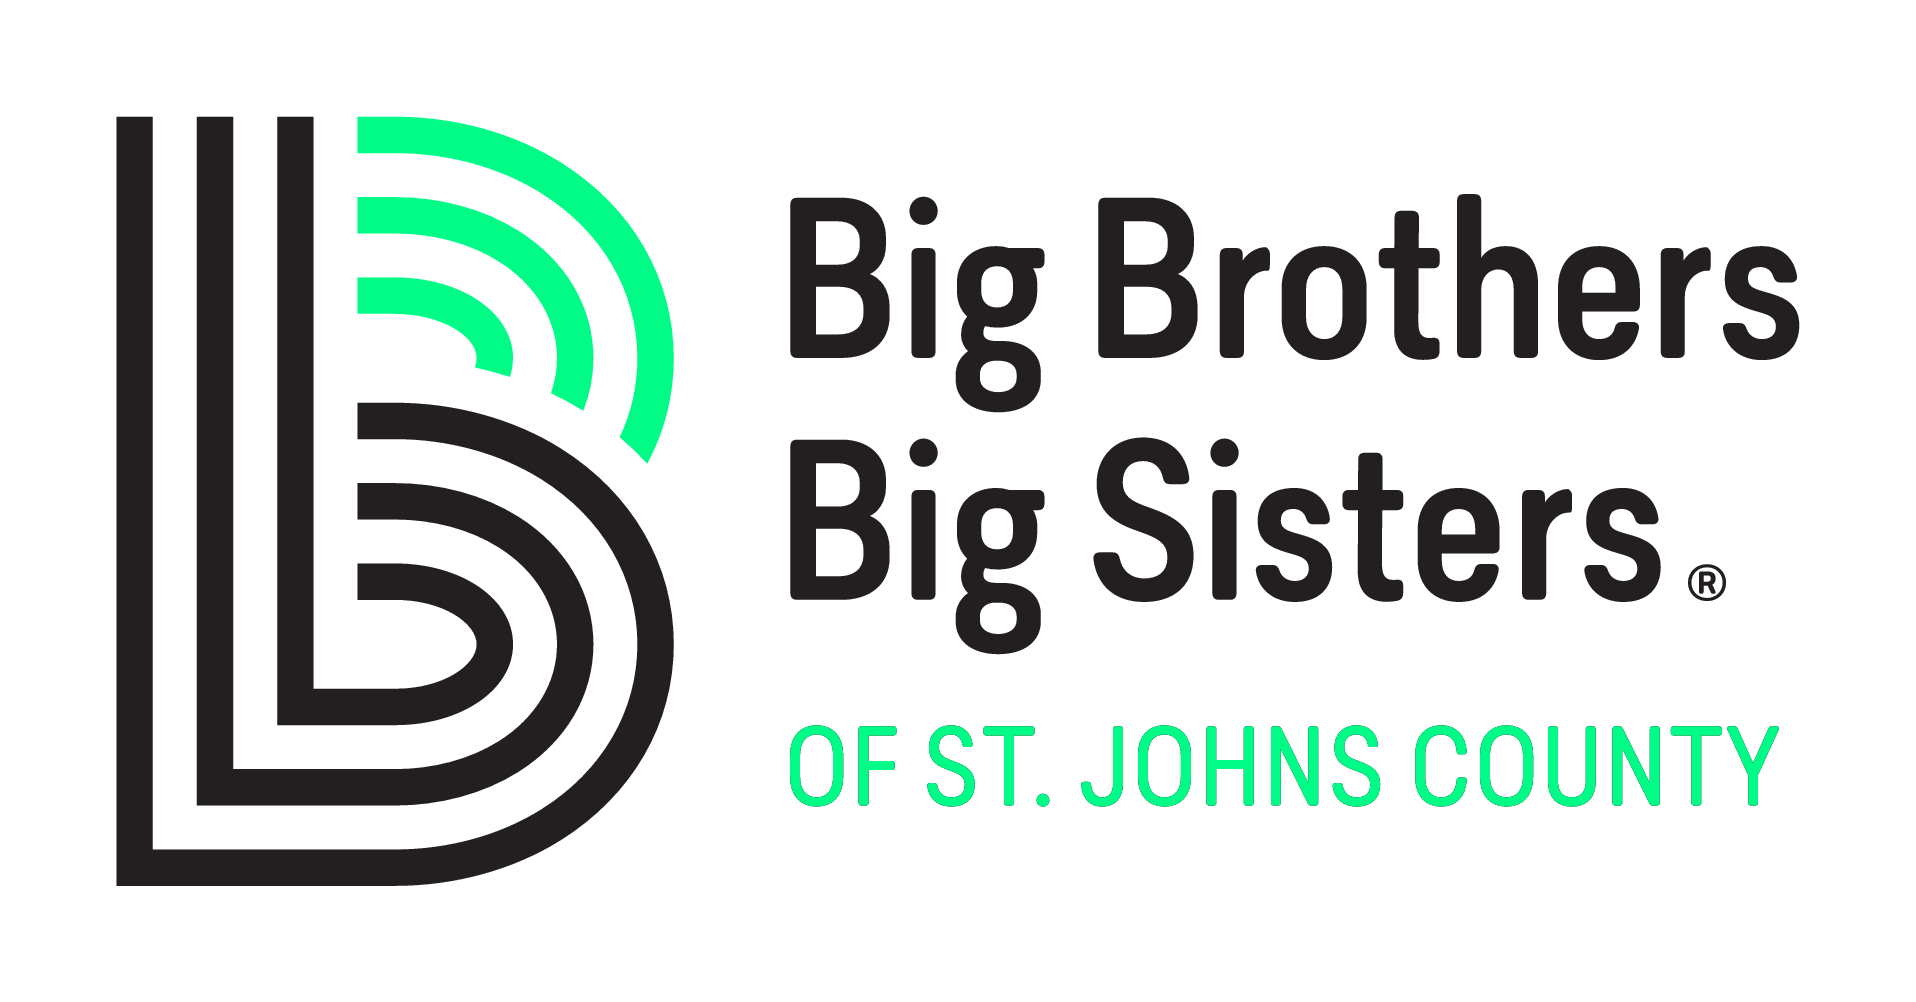 Big Brothers Big Sisters of St. Johns County logo